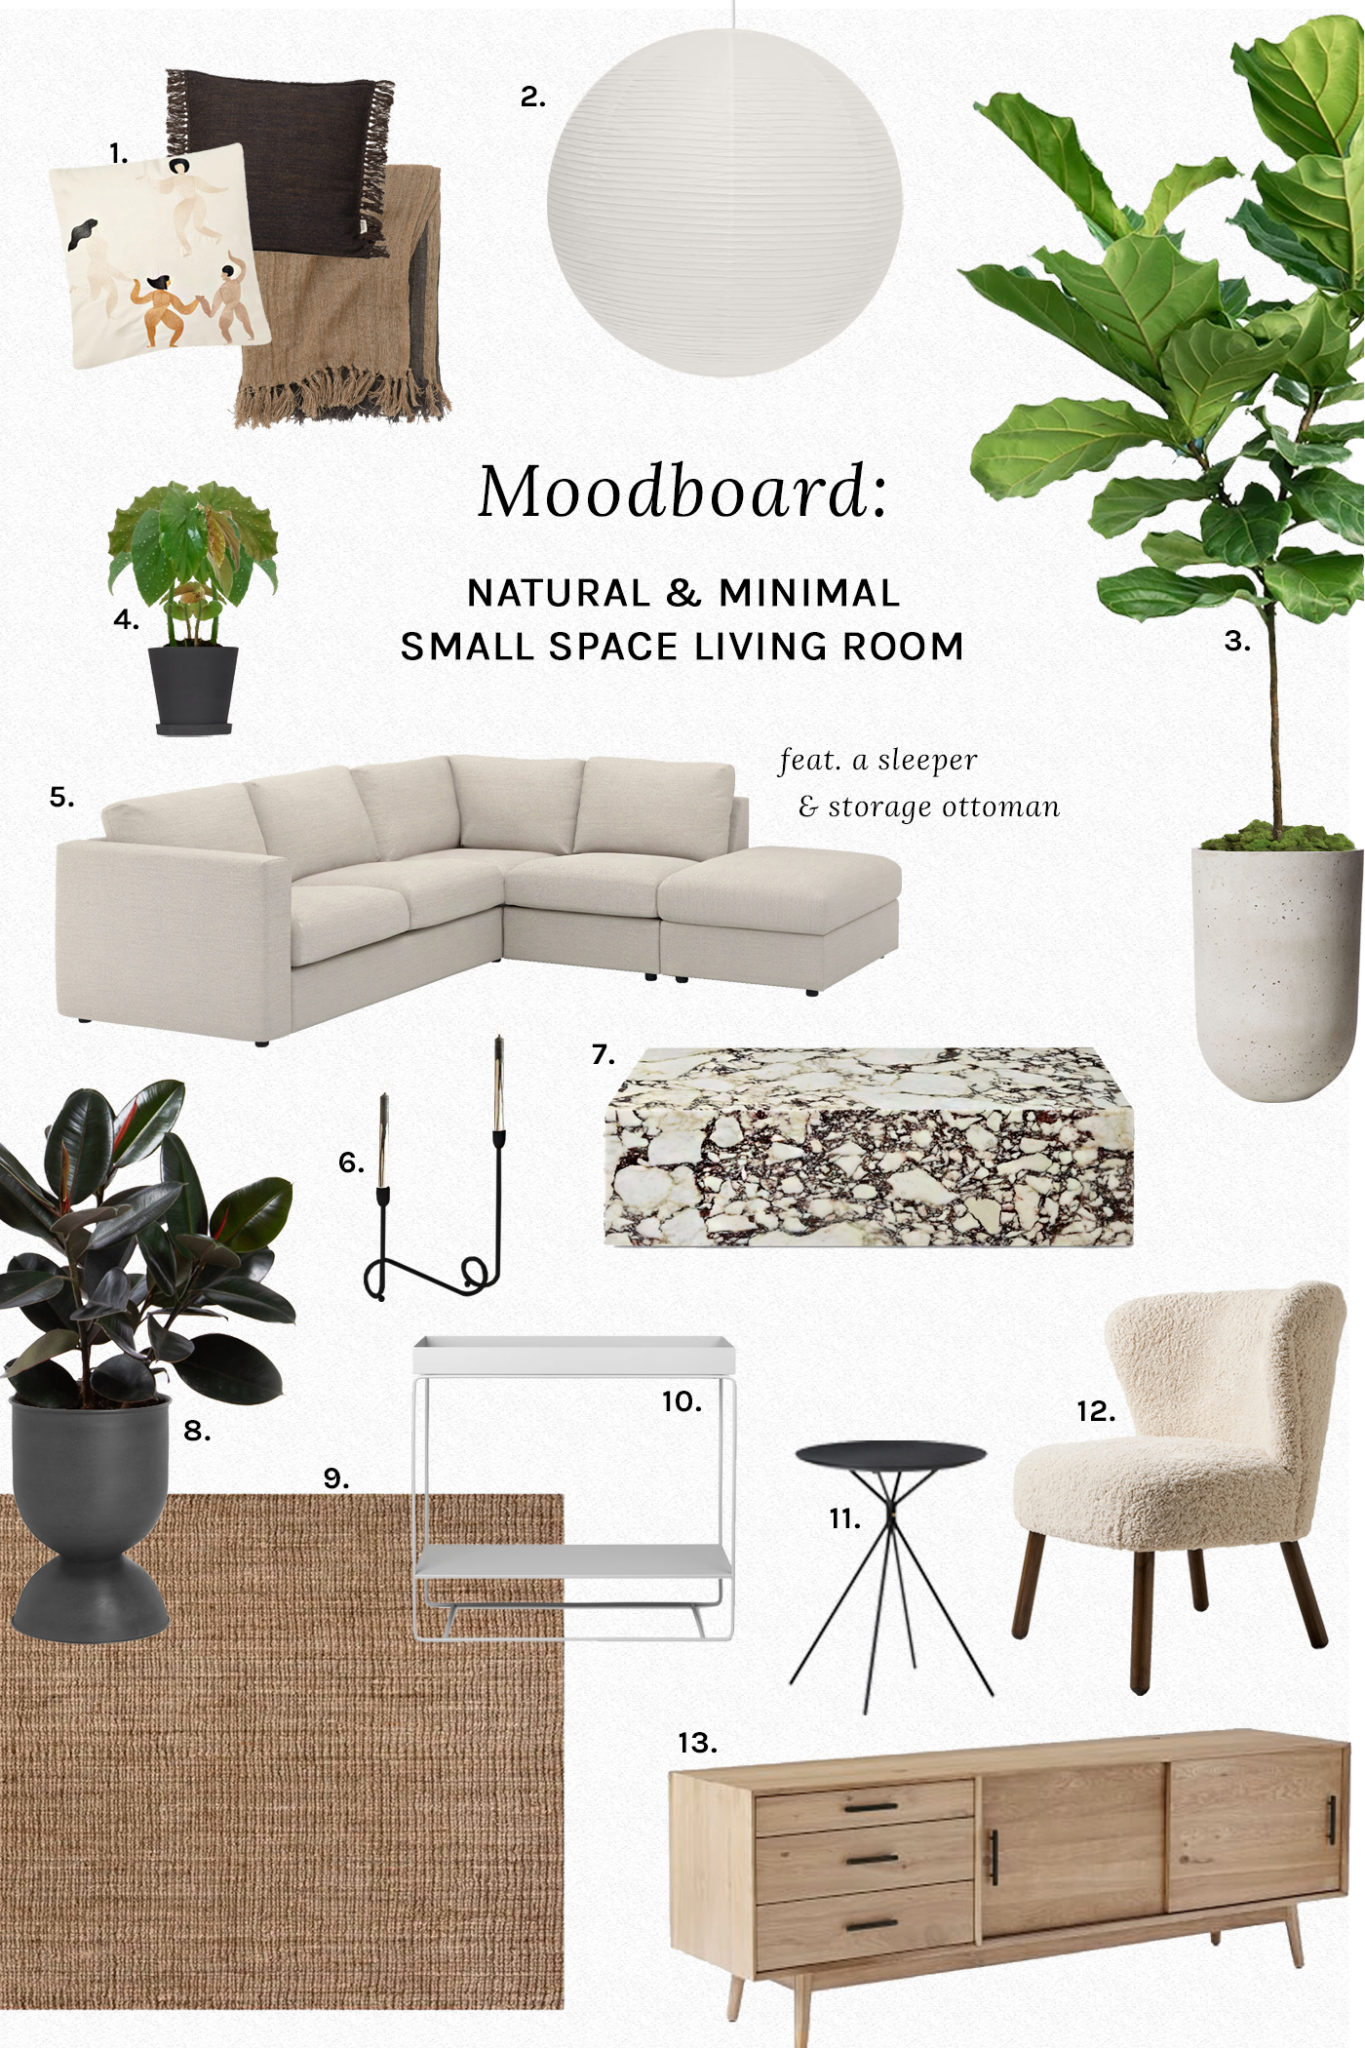 Moodboard: Natural & Minimal Small Space Living Room - Hej Doll ...